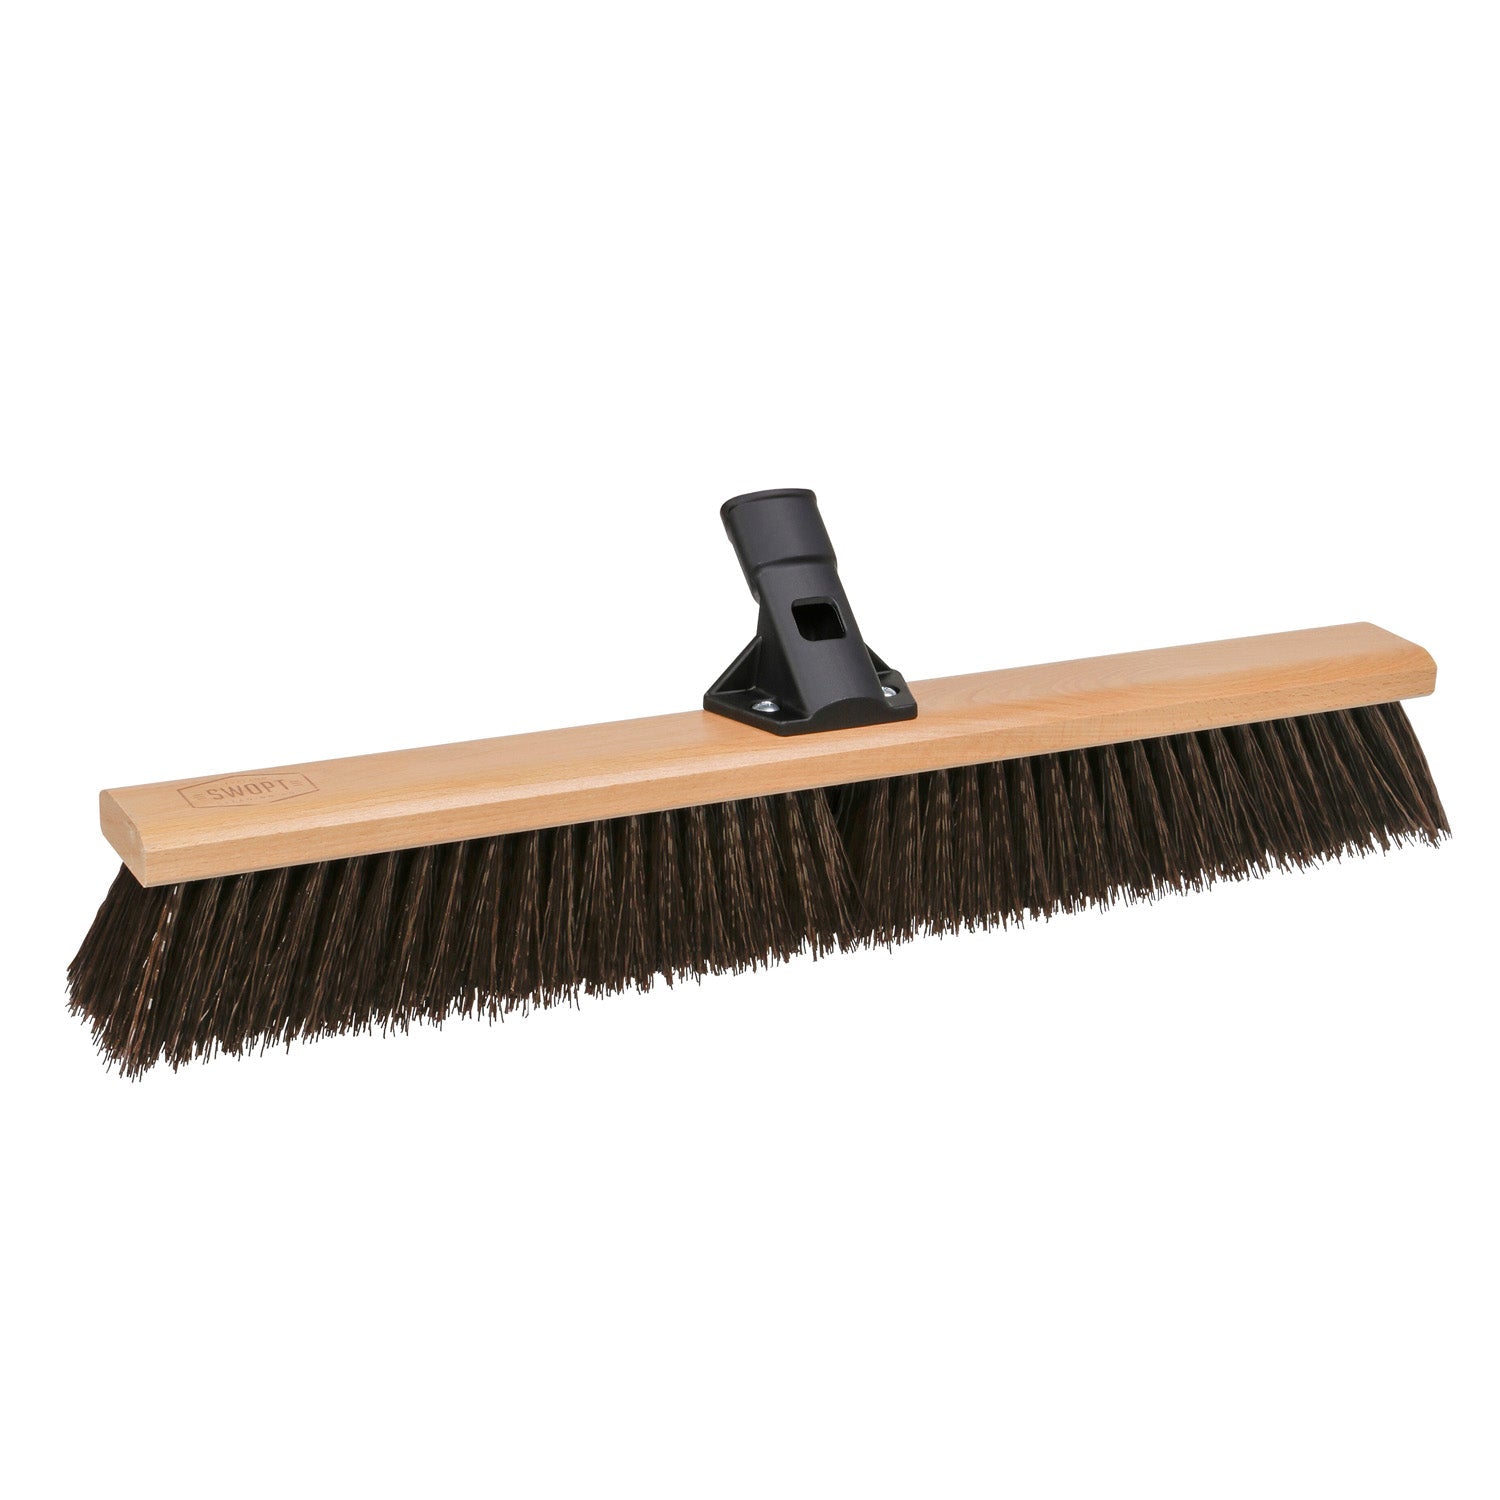  Hand Broom Soft Bristle Cleaning Brush Wooden Handle